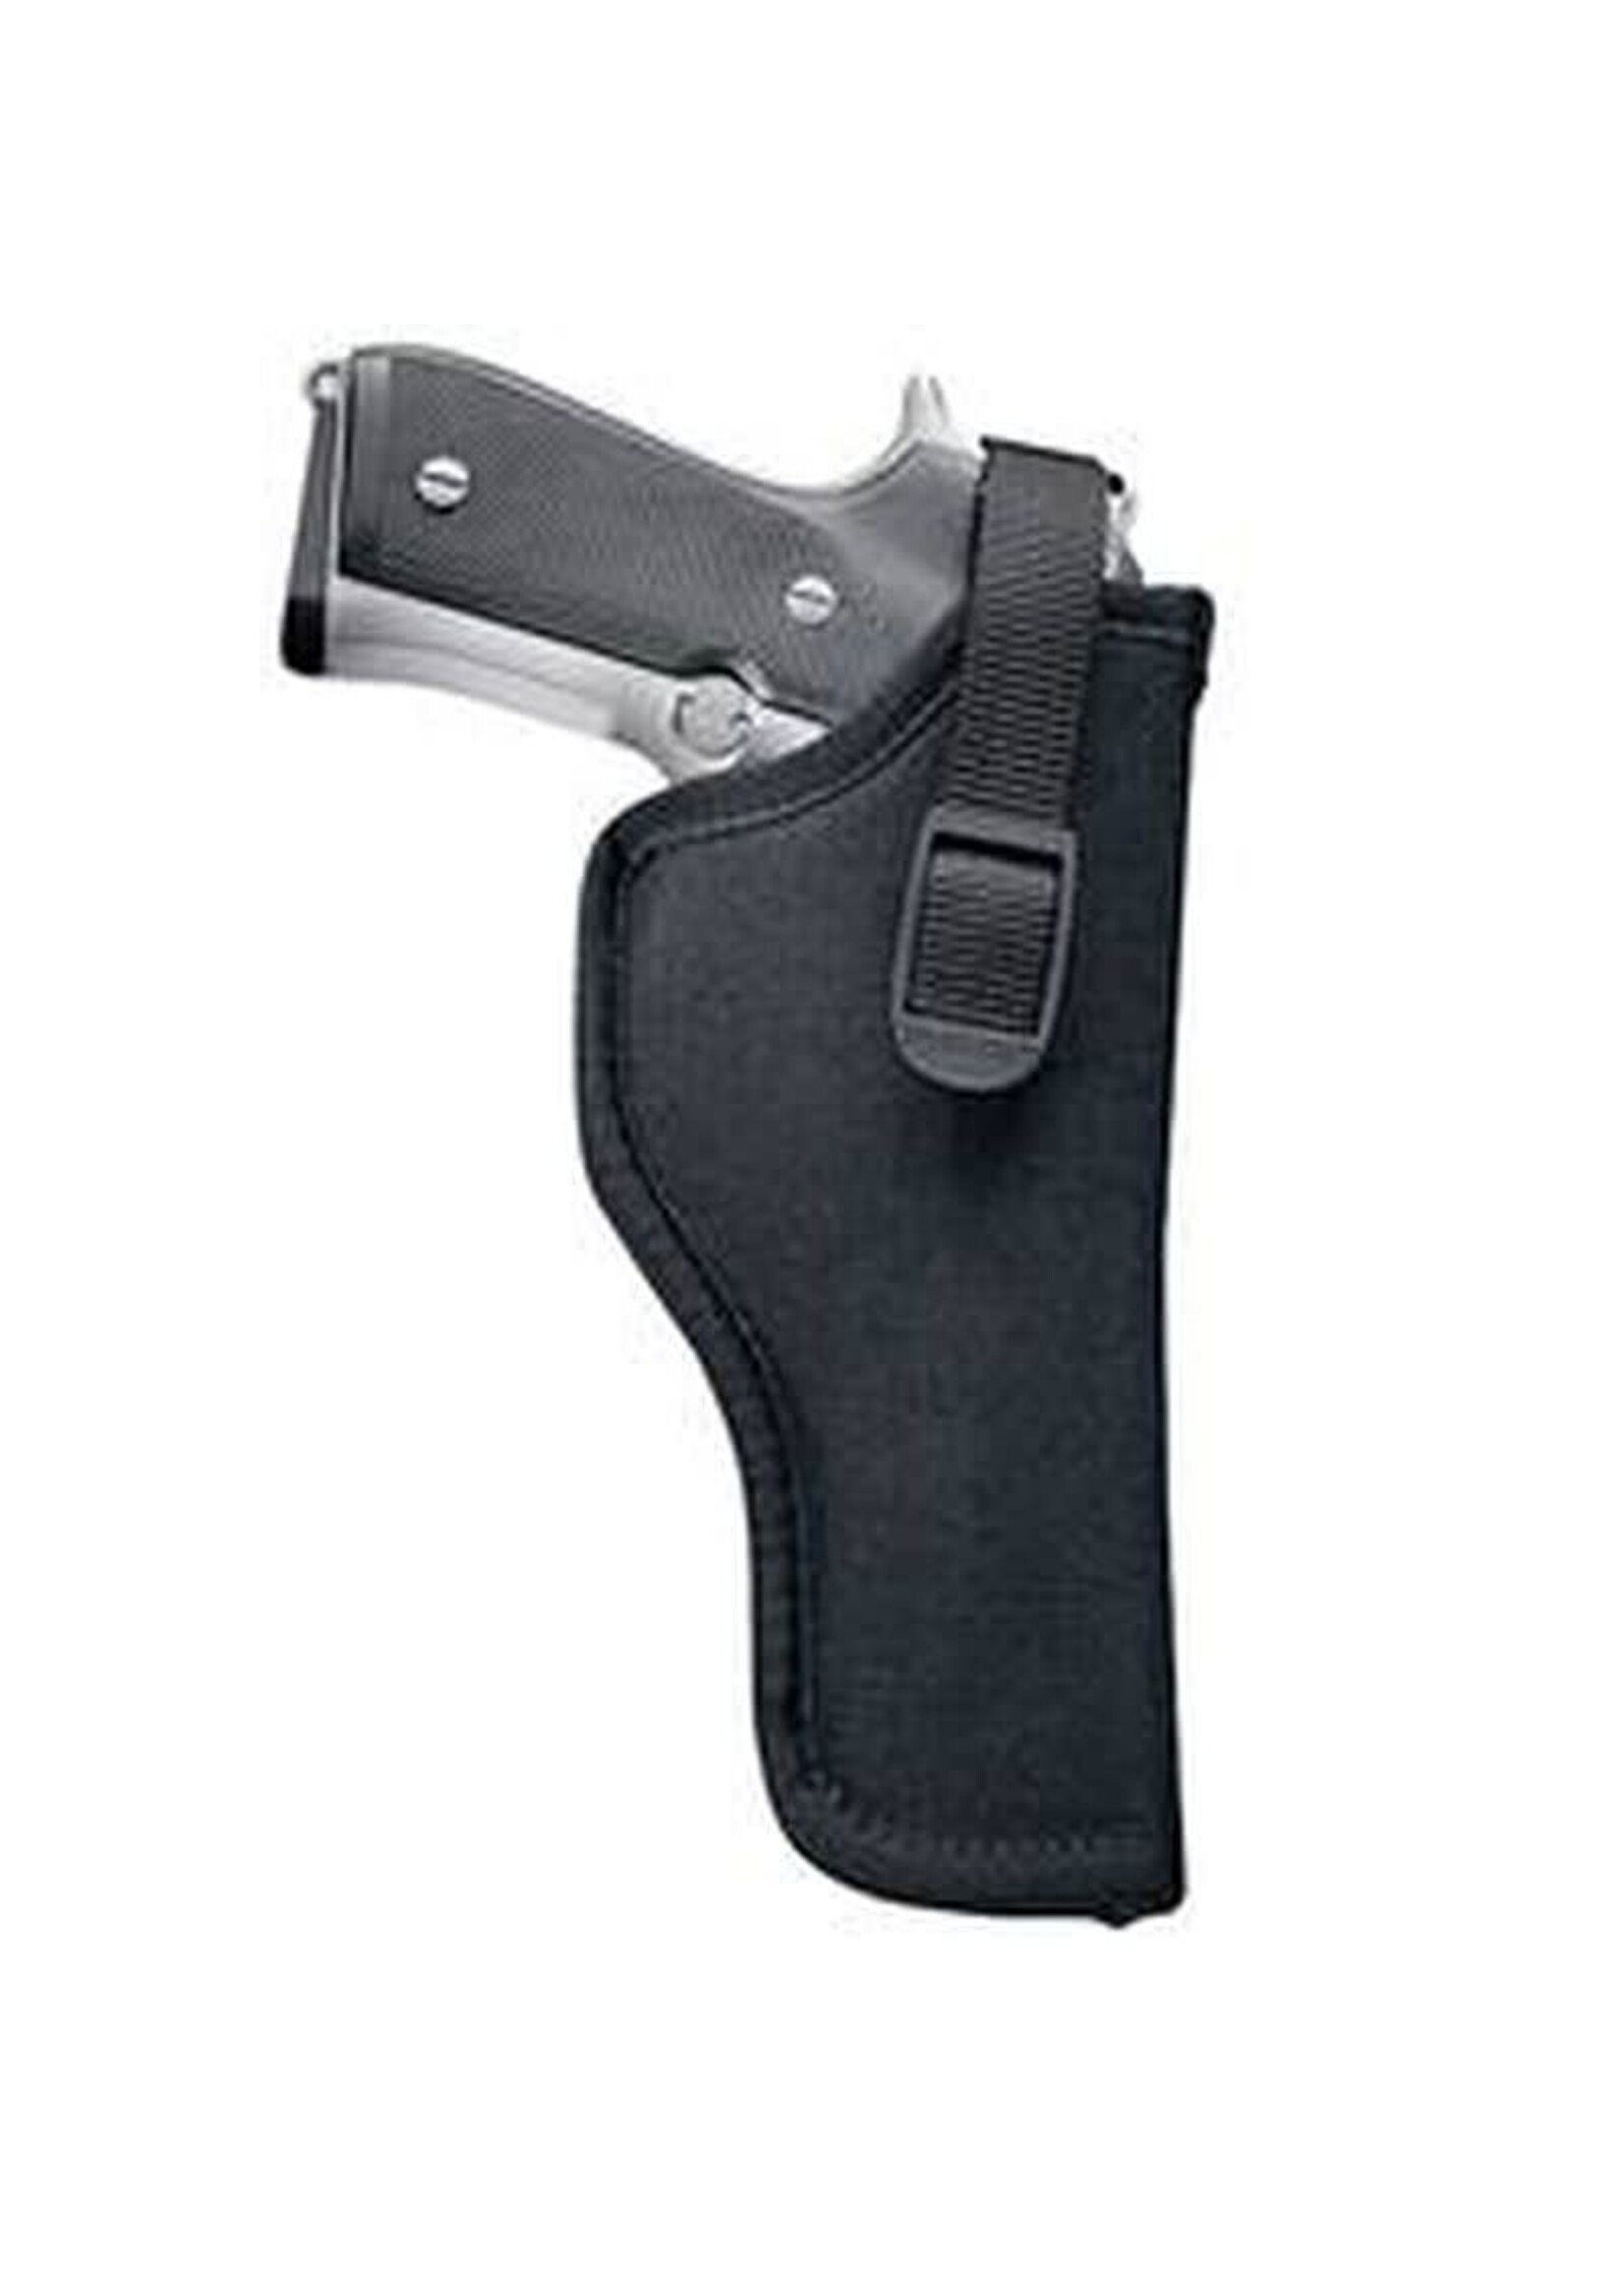 UNCLE MIKE'S SIDEKICK HIP HOLSTER SIZE 3 OWB RH FOR S&W K FRAME L FRAME & 6" REVOLVERS